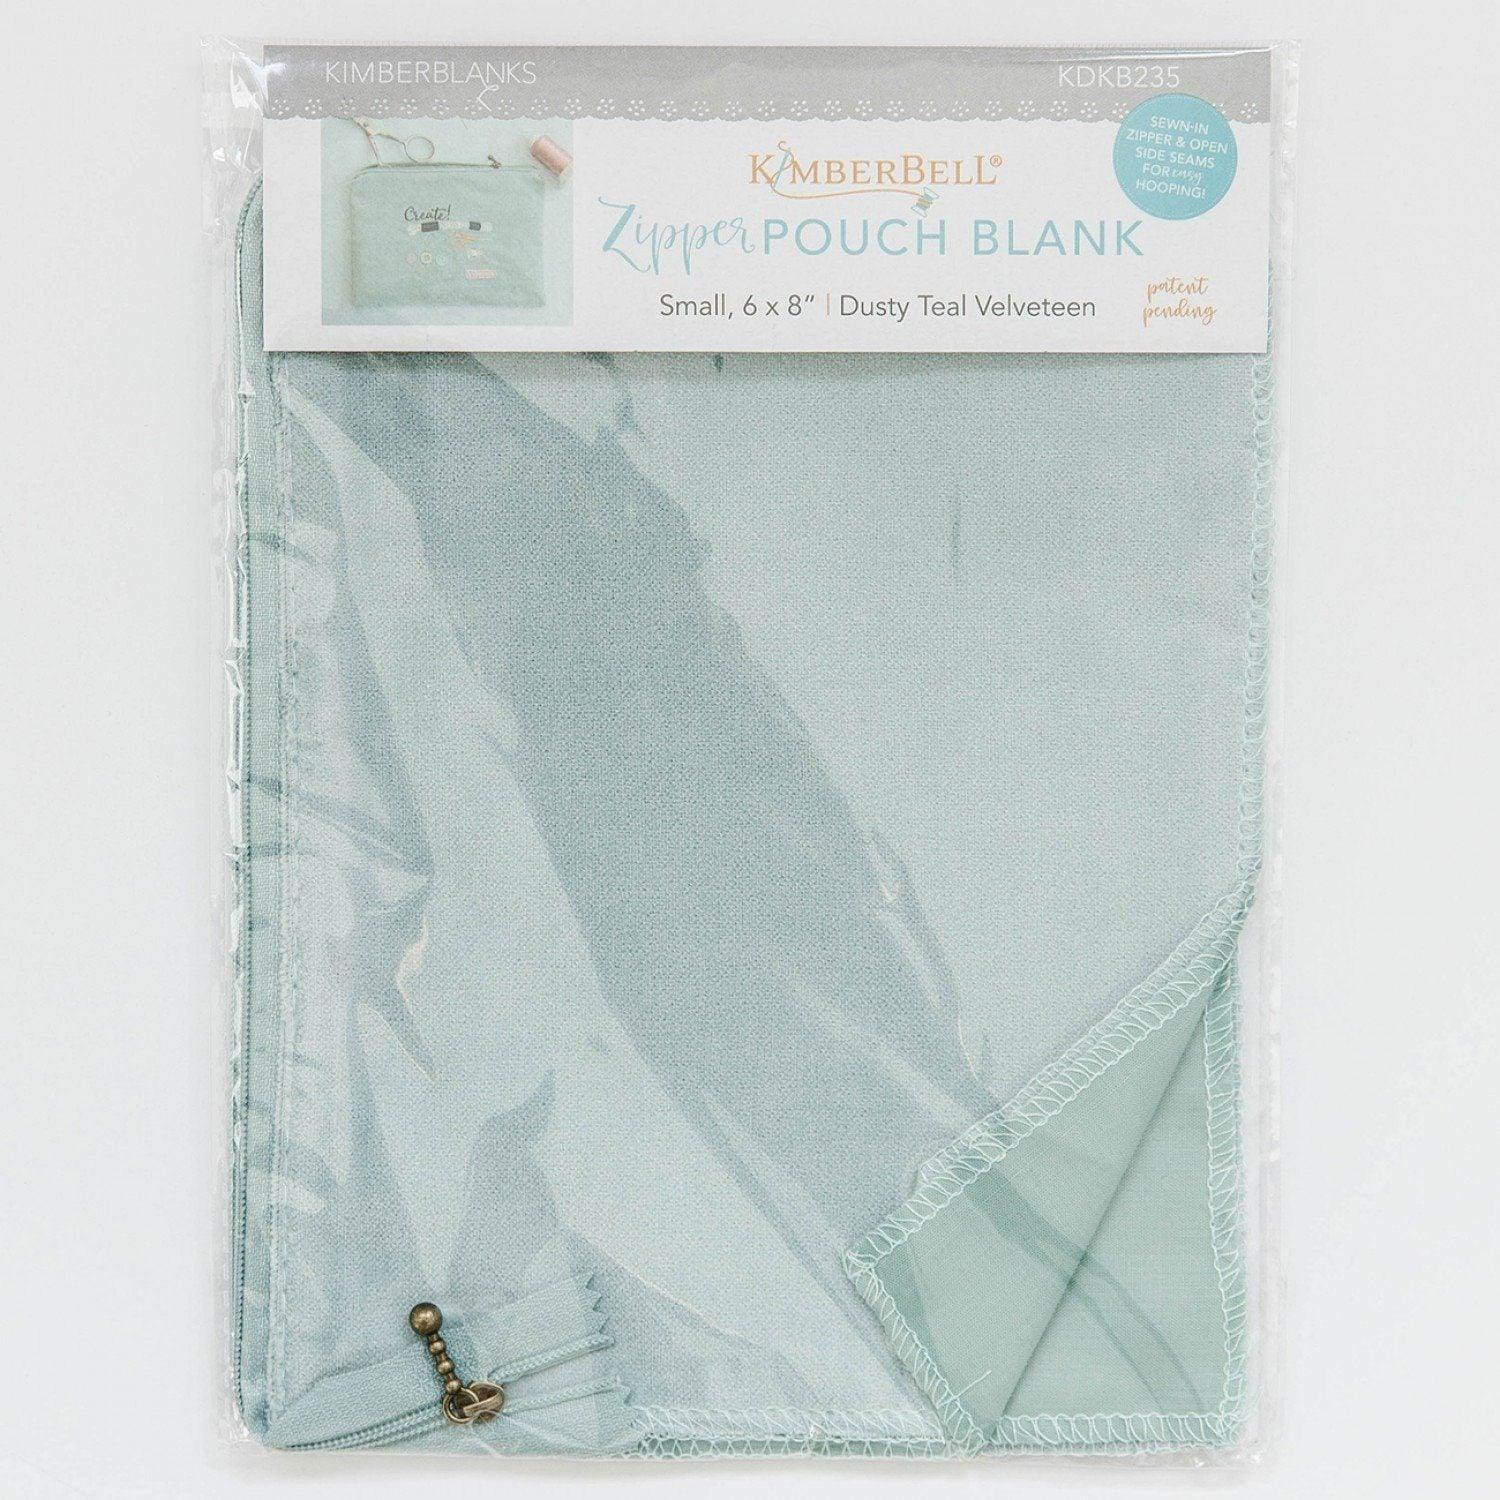 Zipper Pouch Blank - Dusty Teal - Velveteen - Small (6" x 8") - Kimberbell - Kawartha Quilting and Sewing LTD.